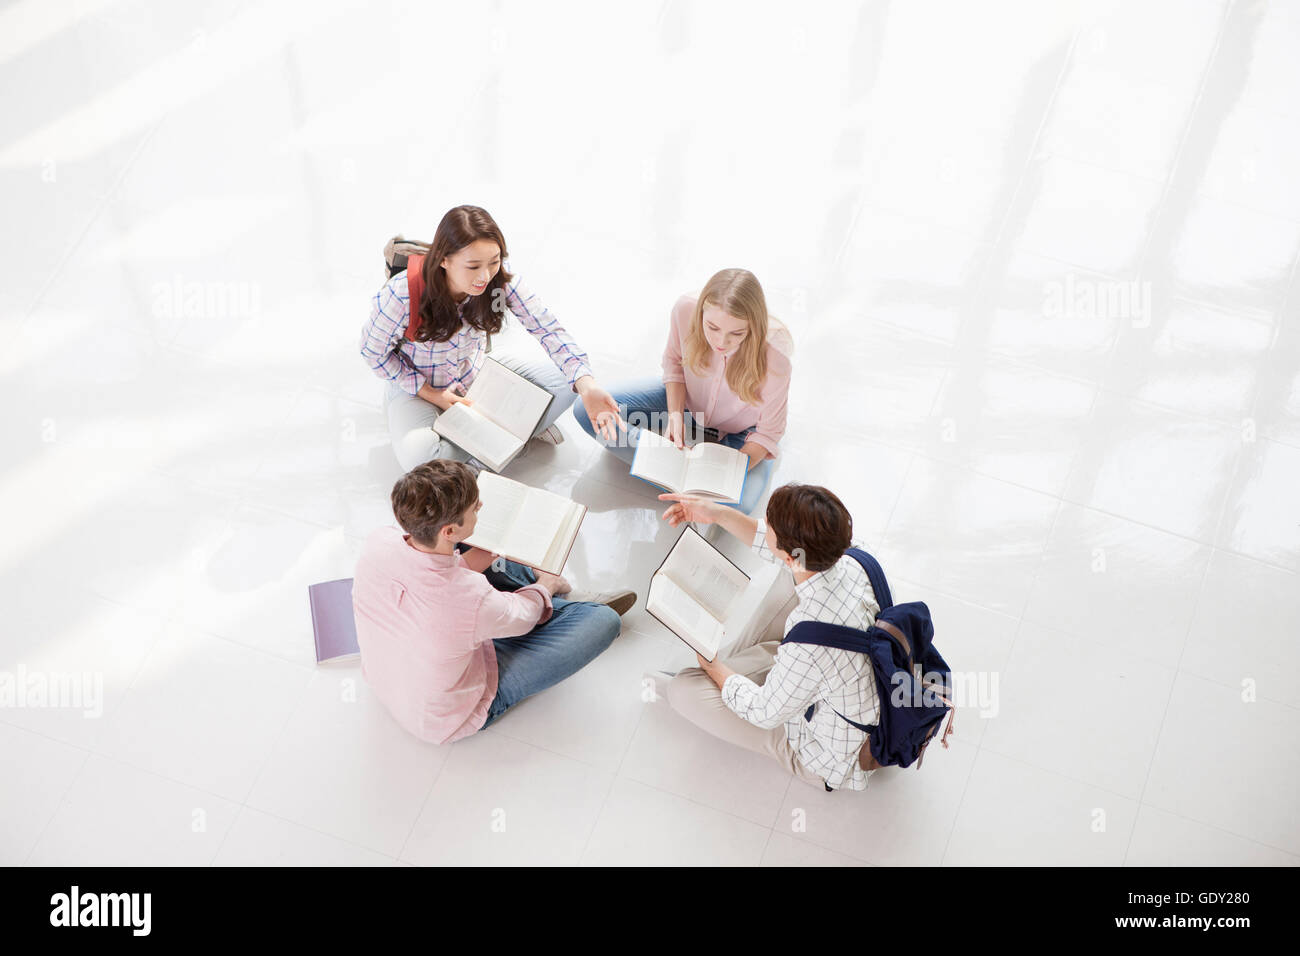 High angle view of college students with books sitting in circle Stock Photo